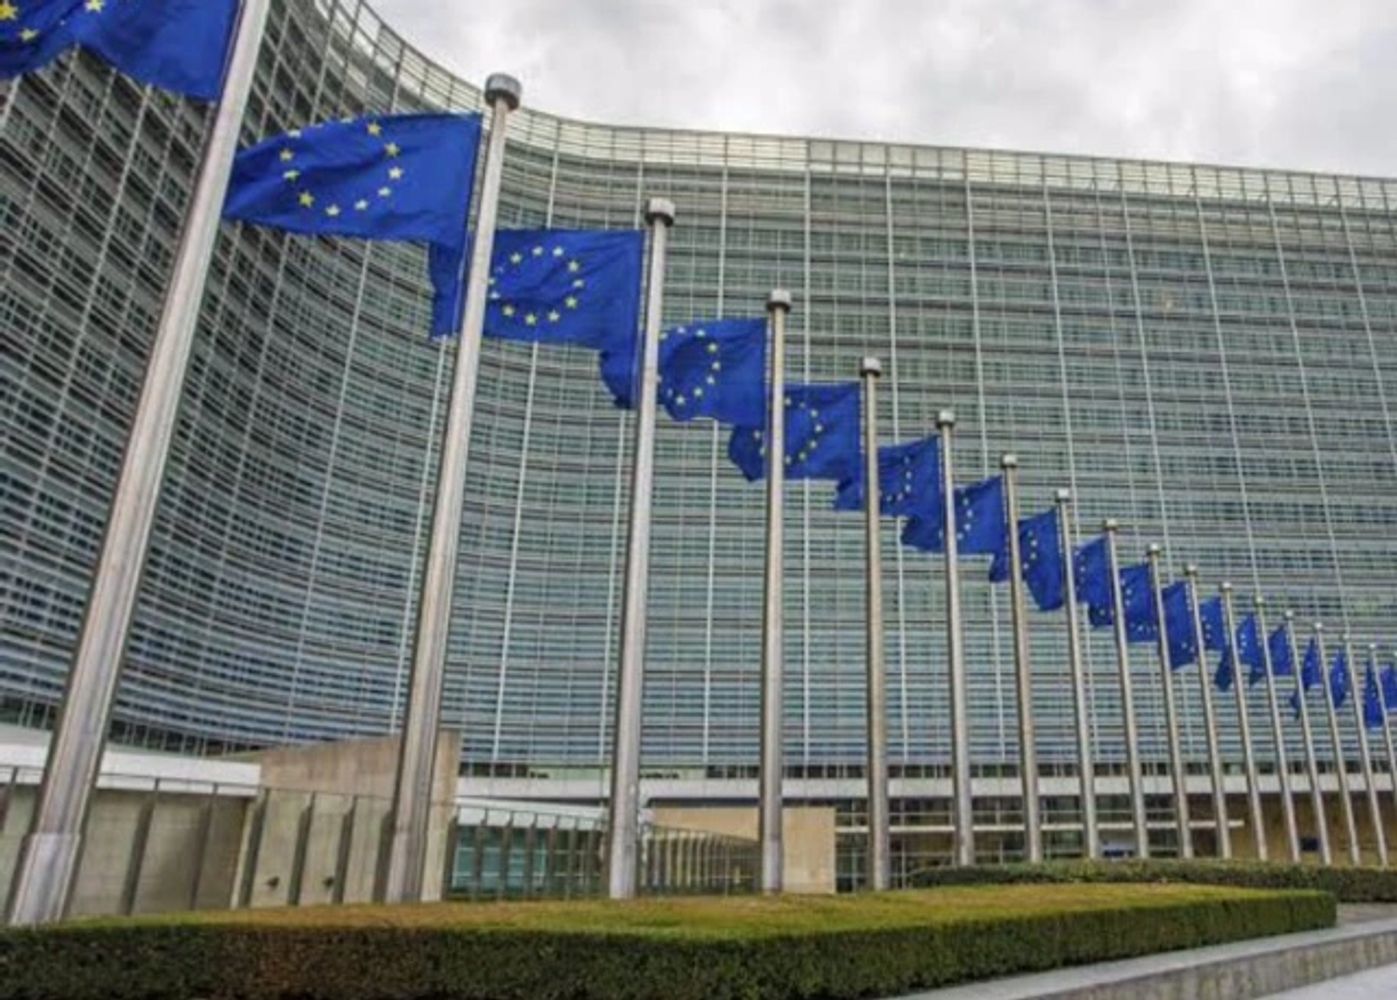 In Brussels, the capital of Europe - the headquarters of the European Union.